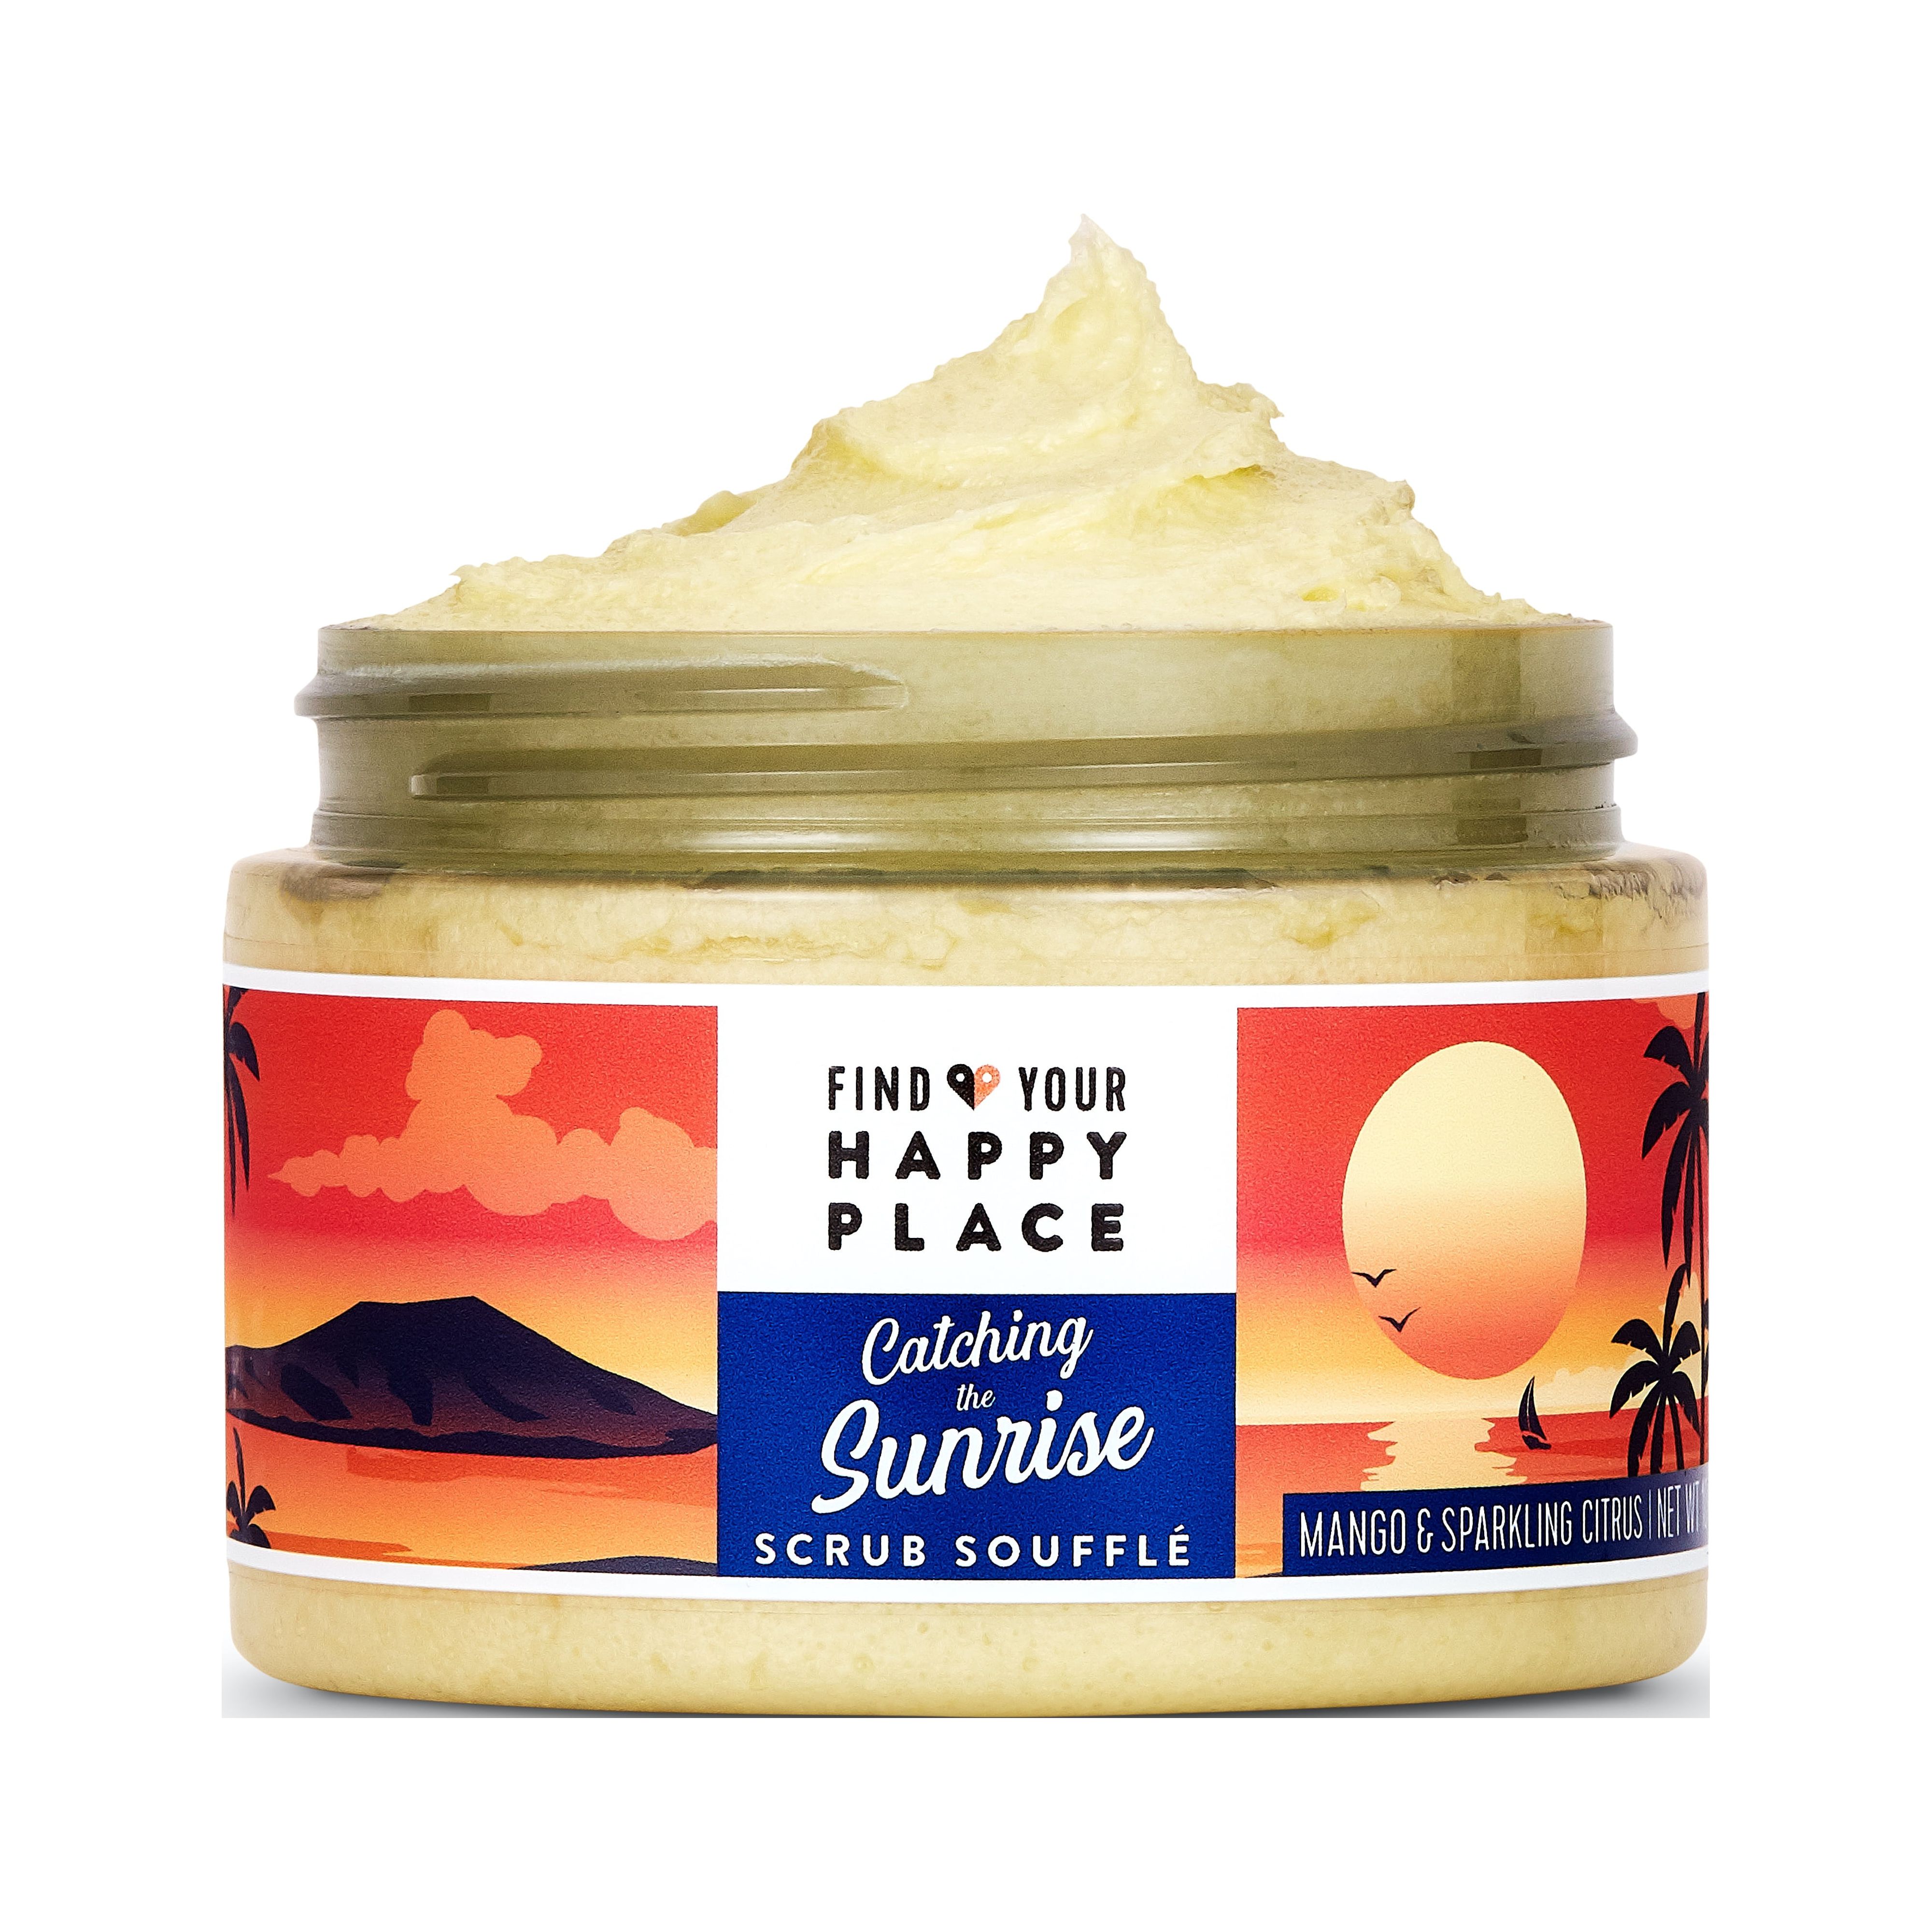 Find Your Happy Place Body Scrub Souffle Catching the Sunrise 10 oz - image 1 of 9